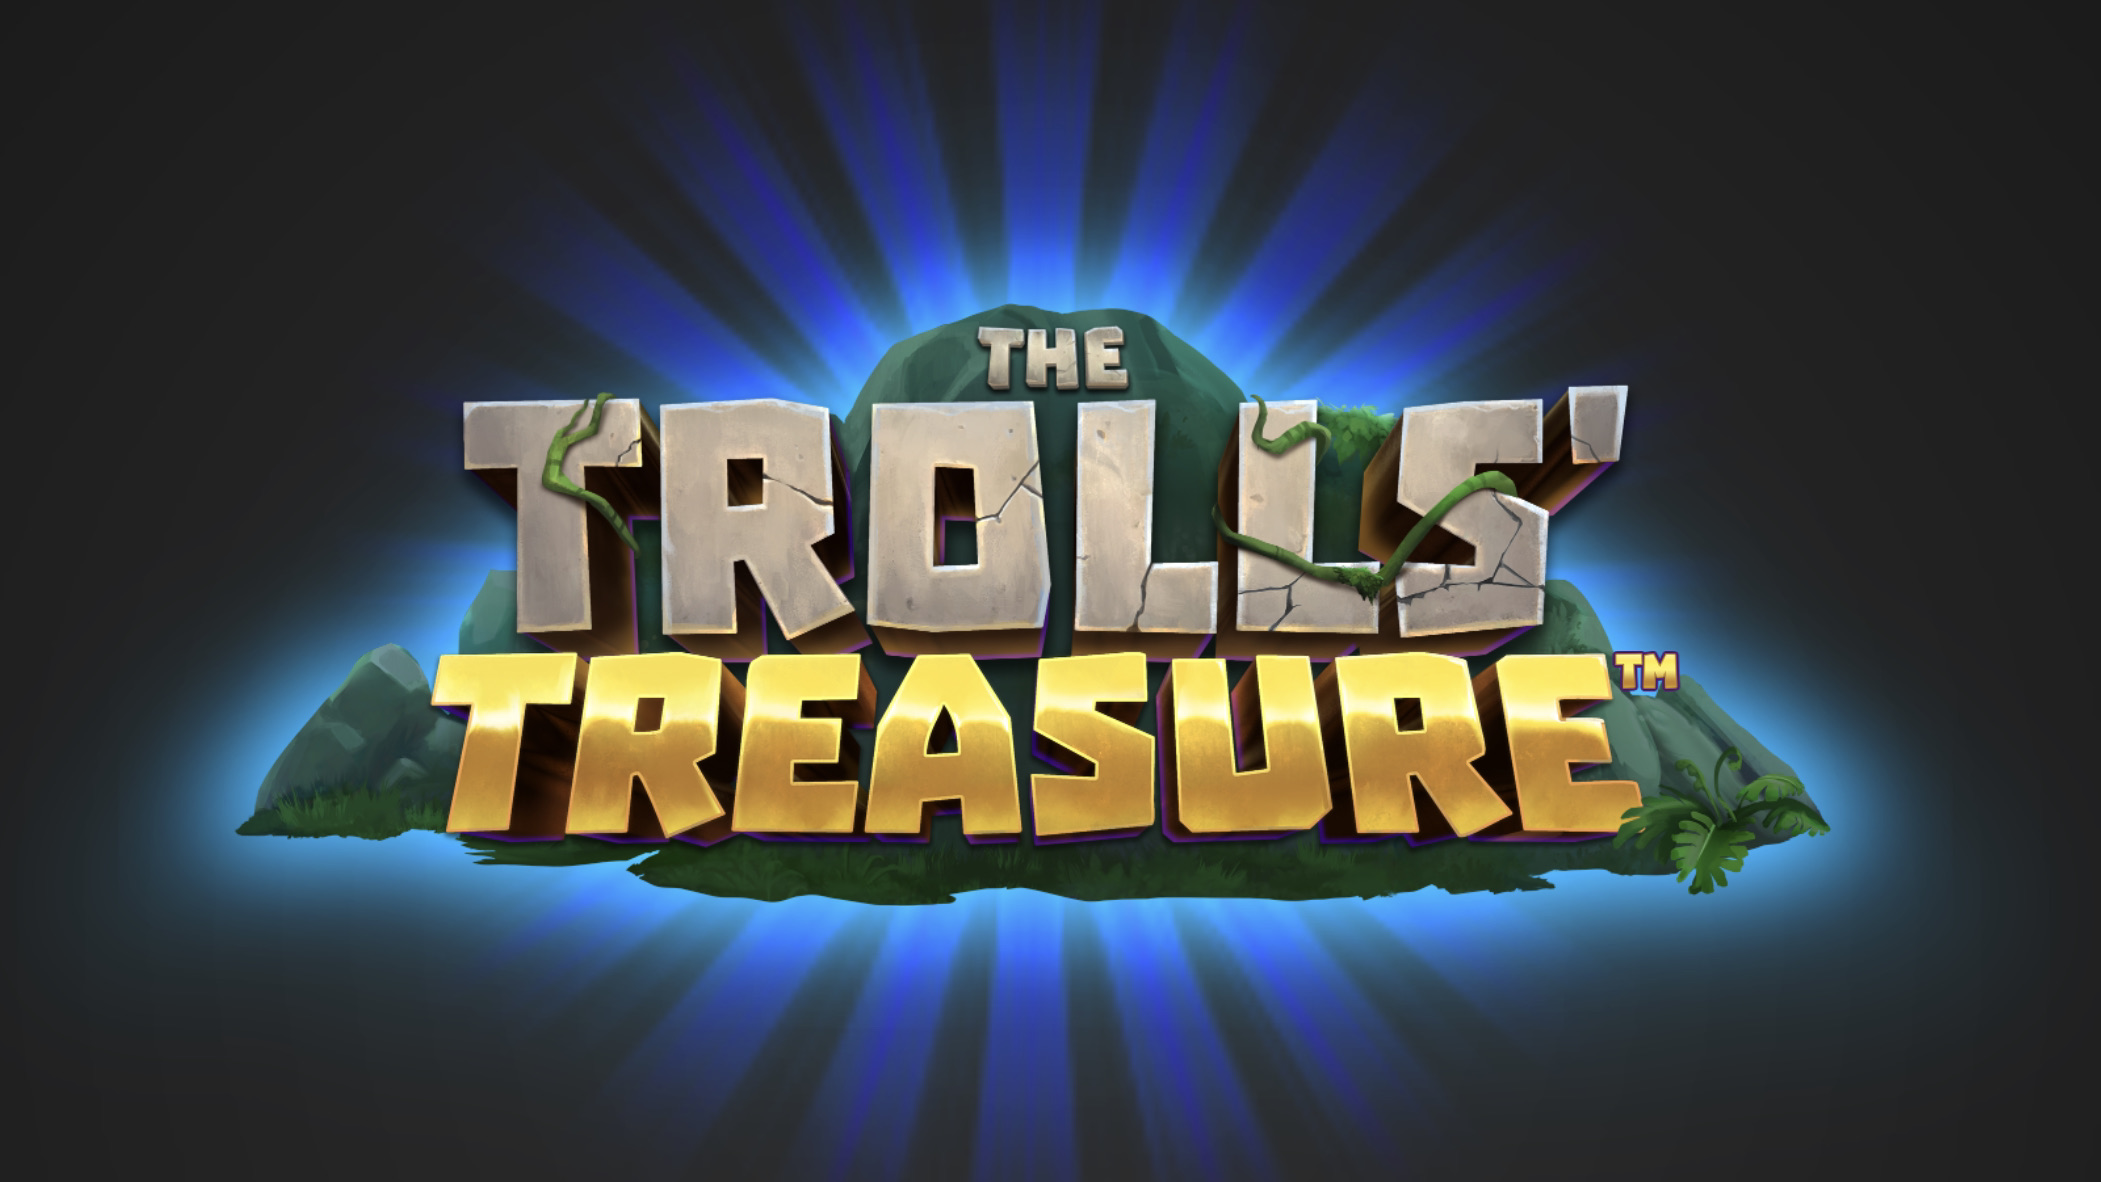 The Trolls’ Treasure is a 5x4, 50-payline video slot that incorporates a maximum win potential of up to x1,000 the bet